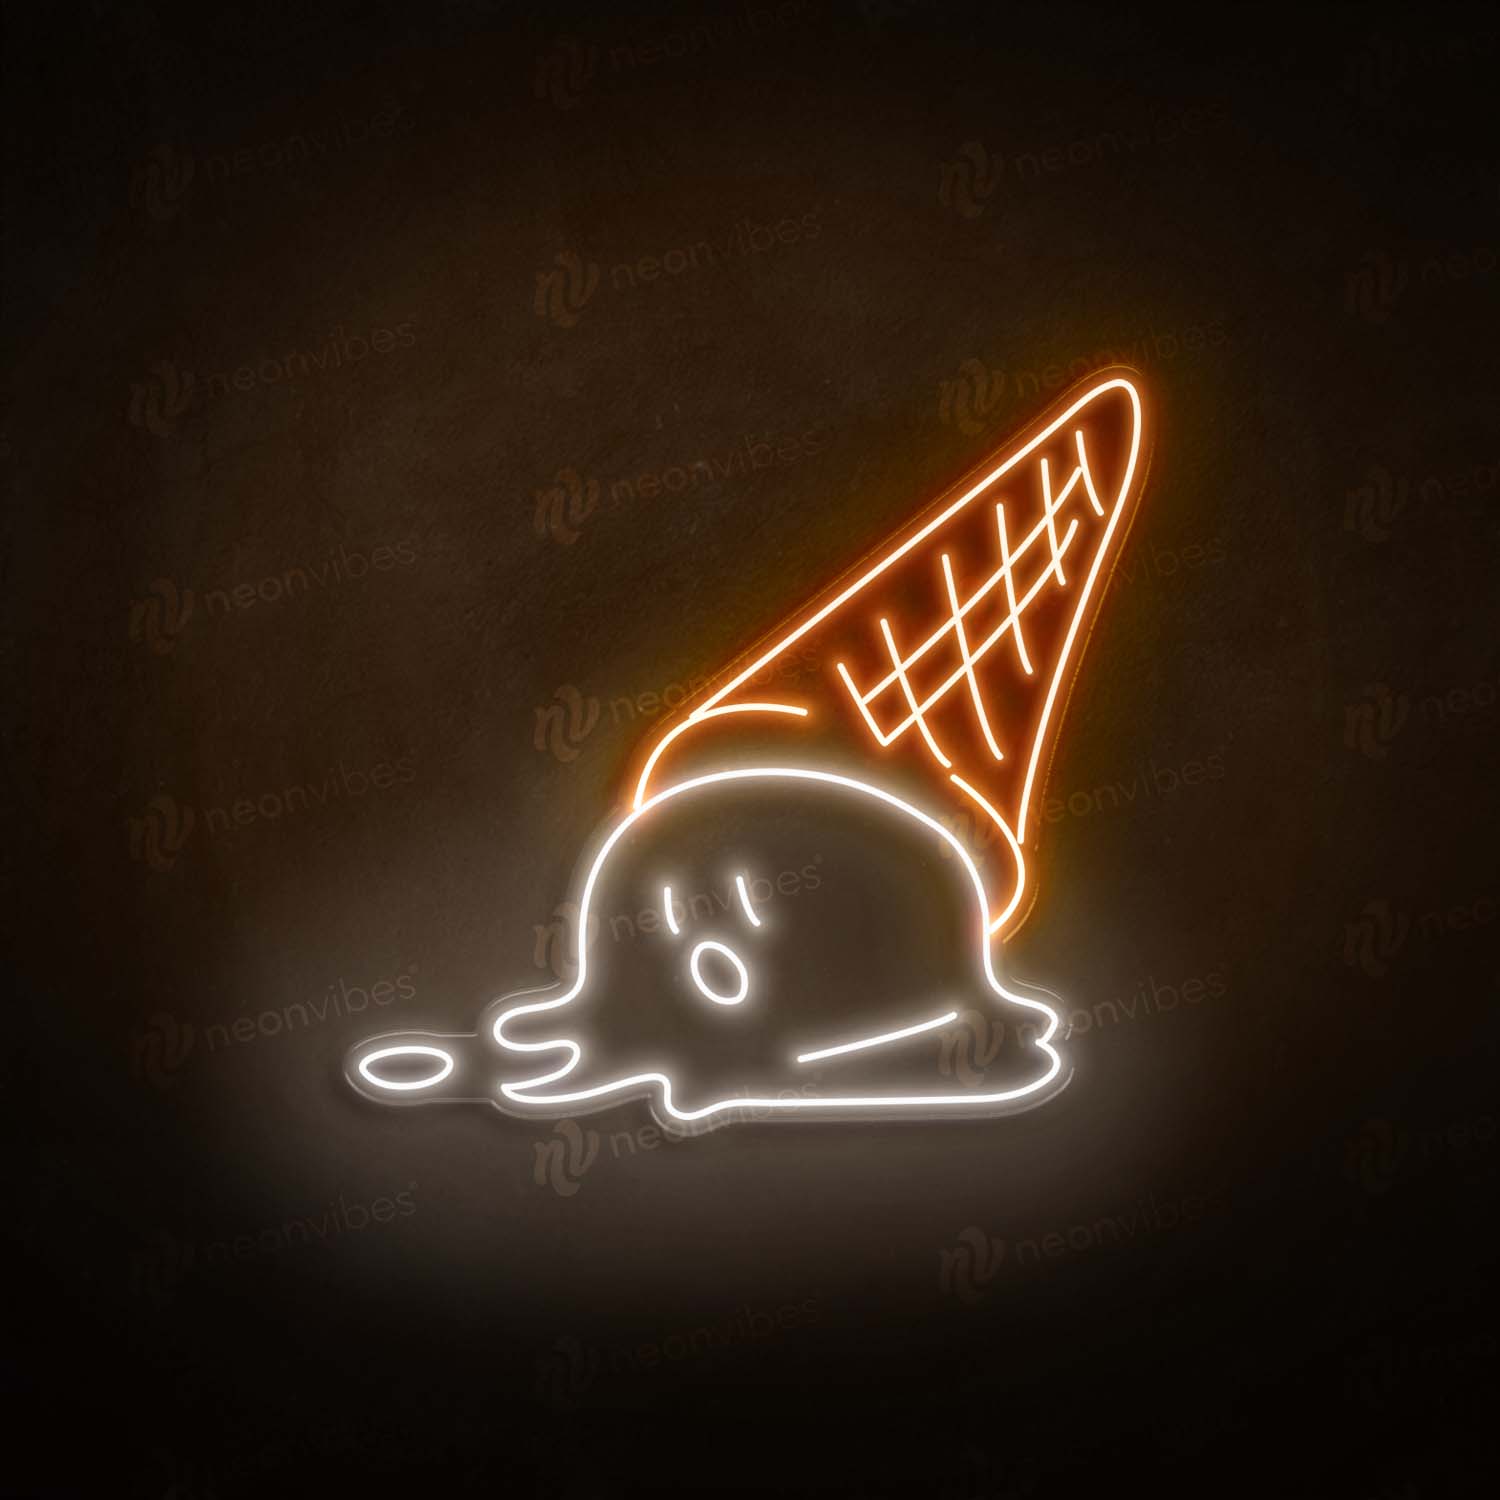 Melted Ice Cream neon sign